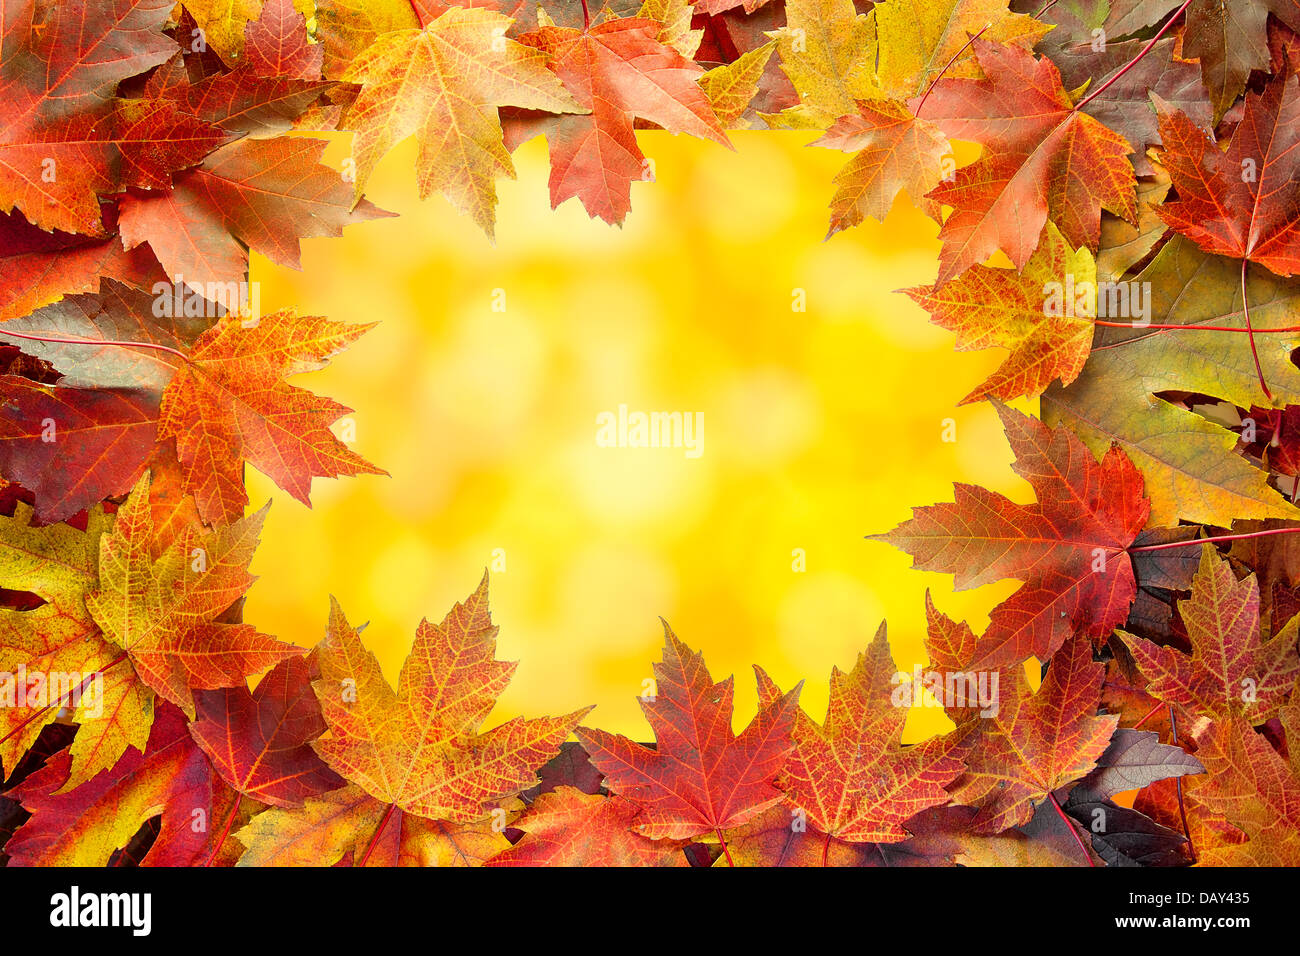 Colorful Autumn Maple Tree Fall Leaves Border with Warm Orange Background with Bokeh Lights Stock Photo